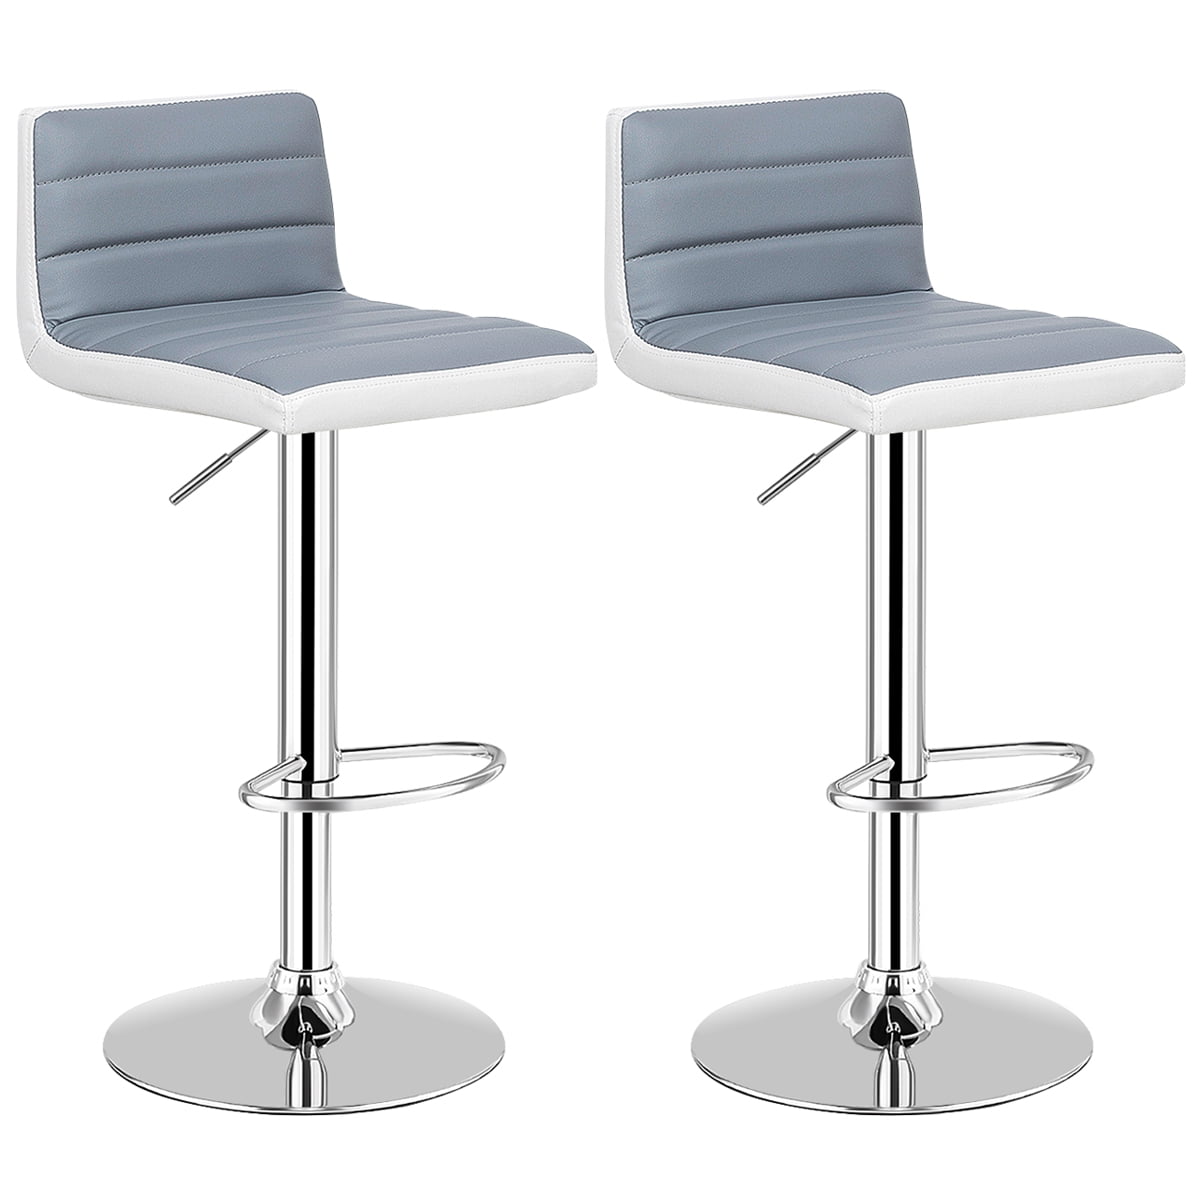 New Modern Adjustable Synthetic Leather Swivel Bar Stools Chairs White-2 Pack 